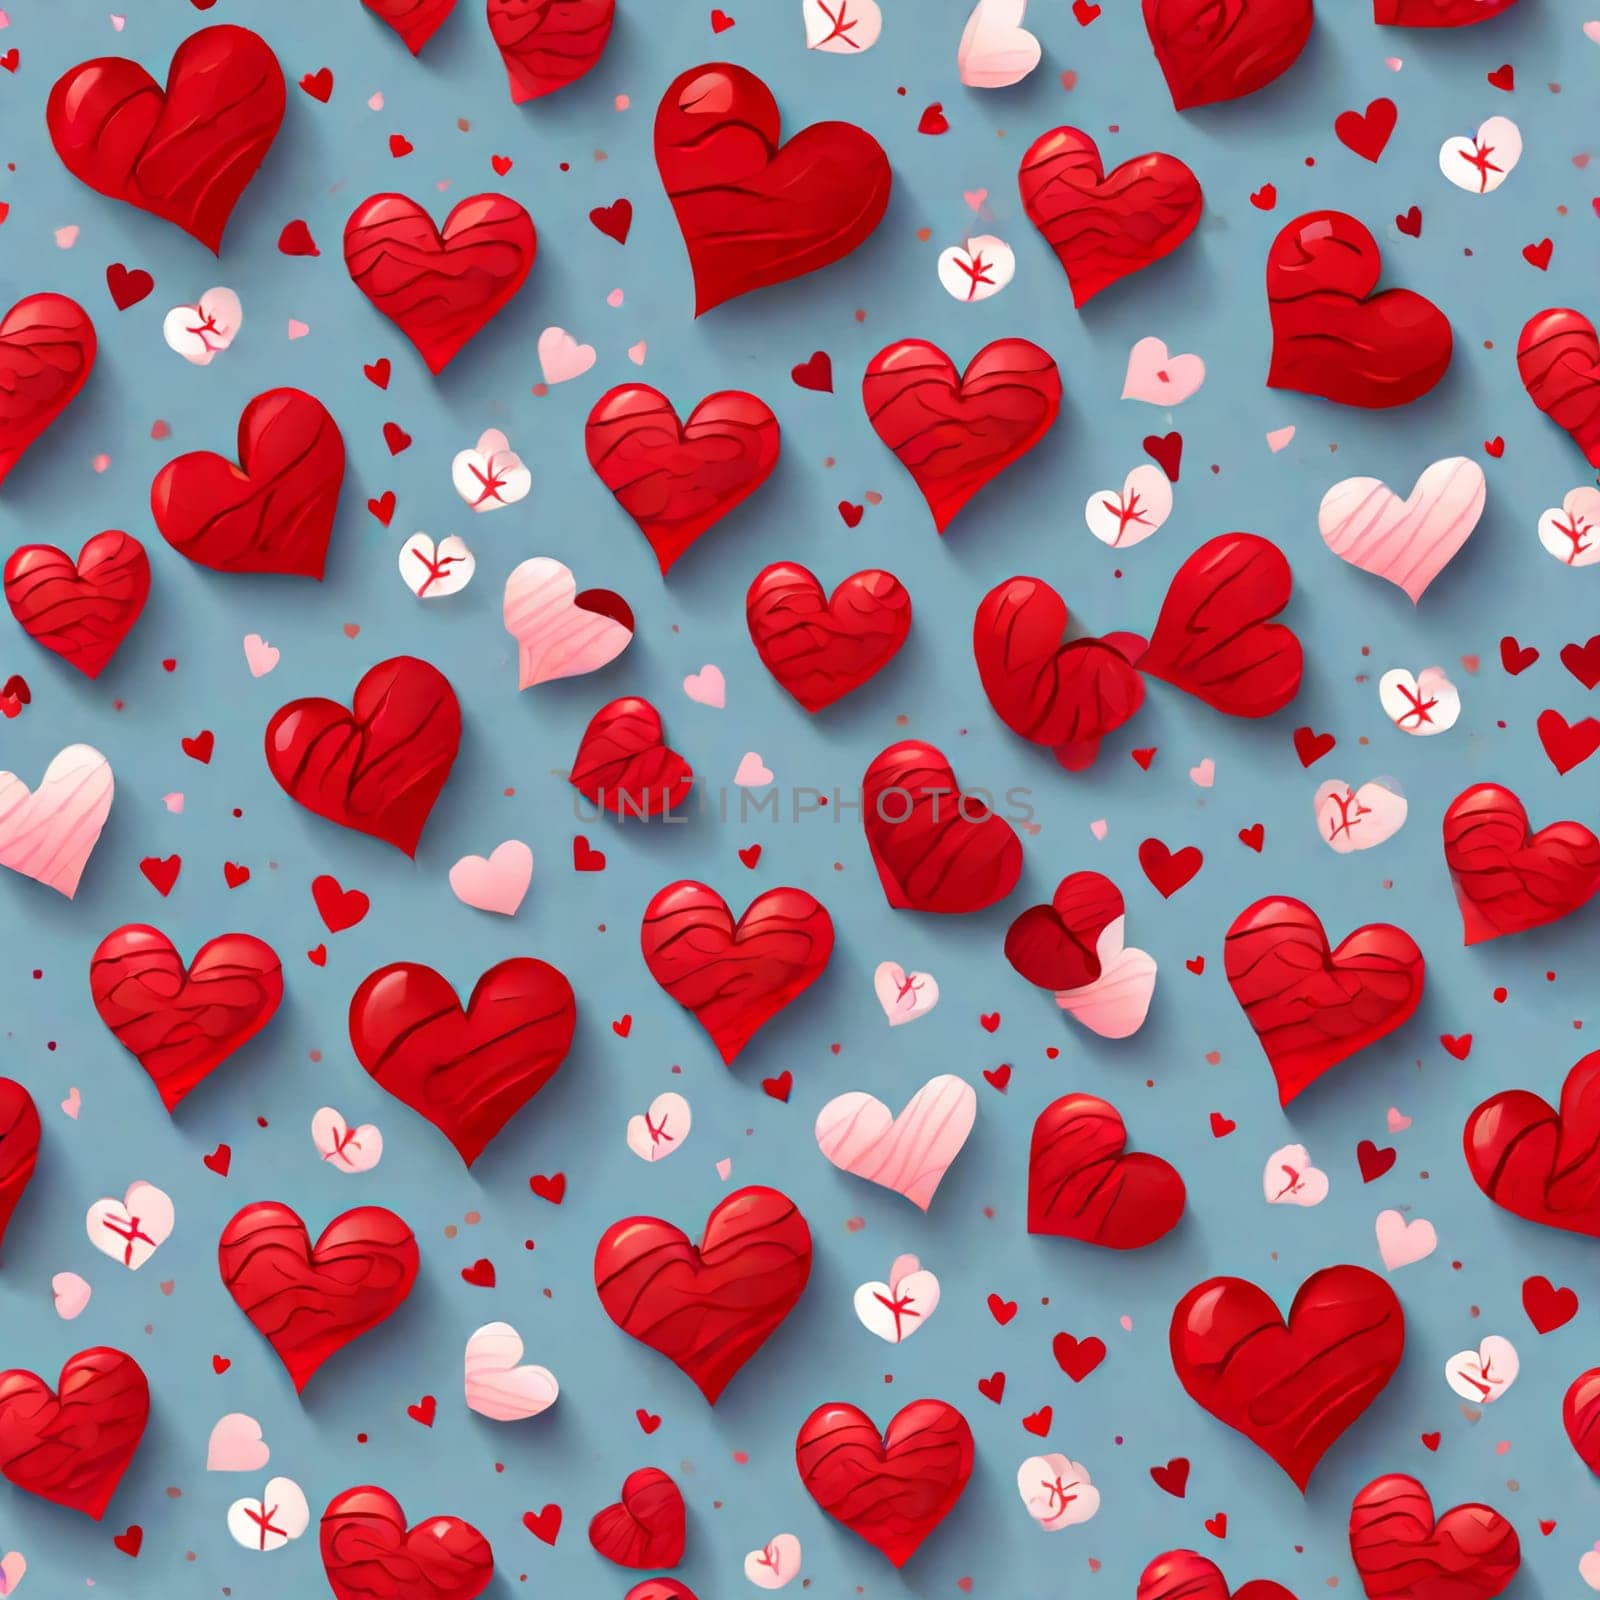 Seamless pattern of red hearts on a blue background by Севостьянов